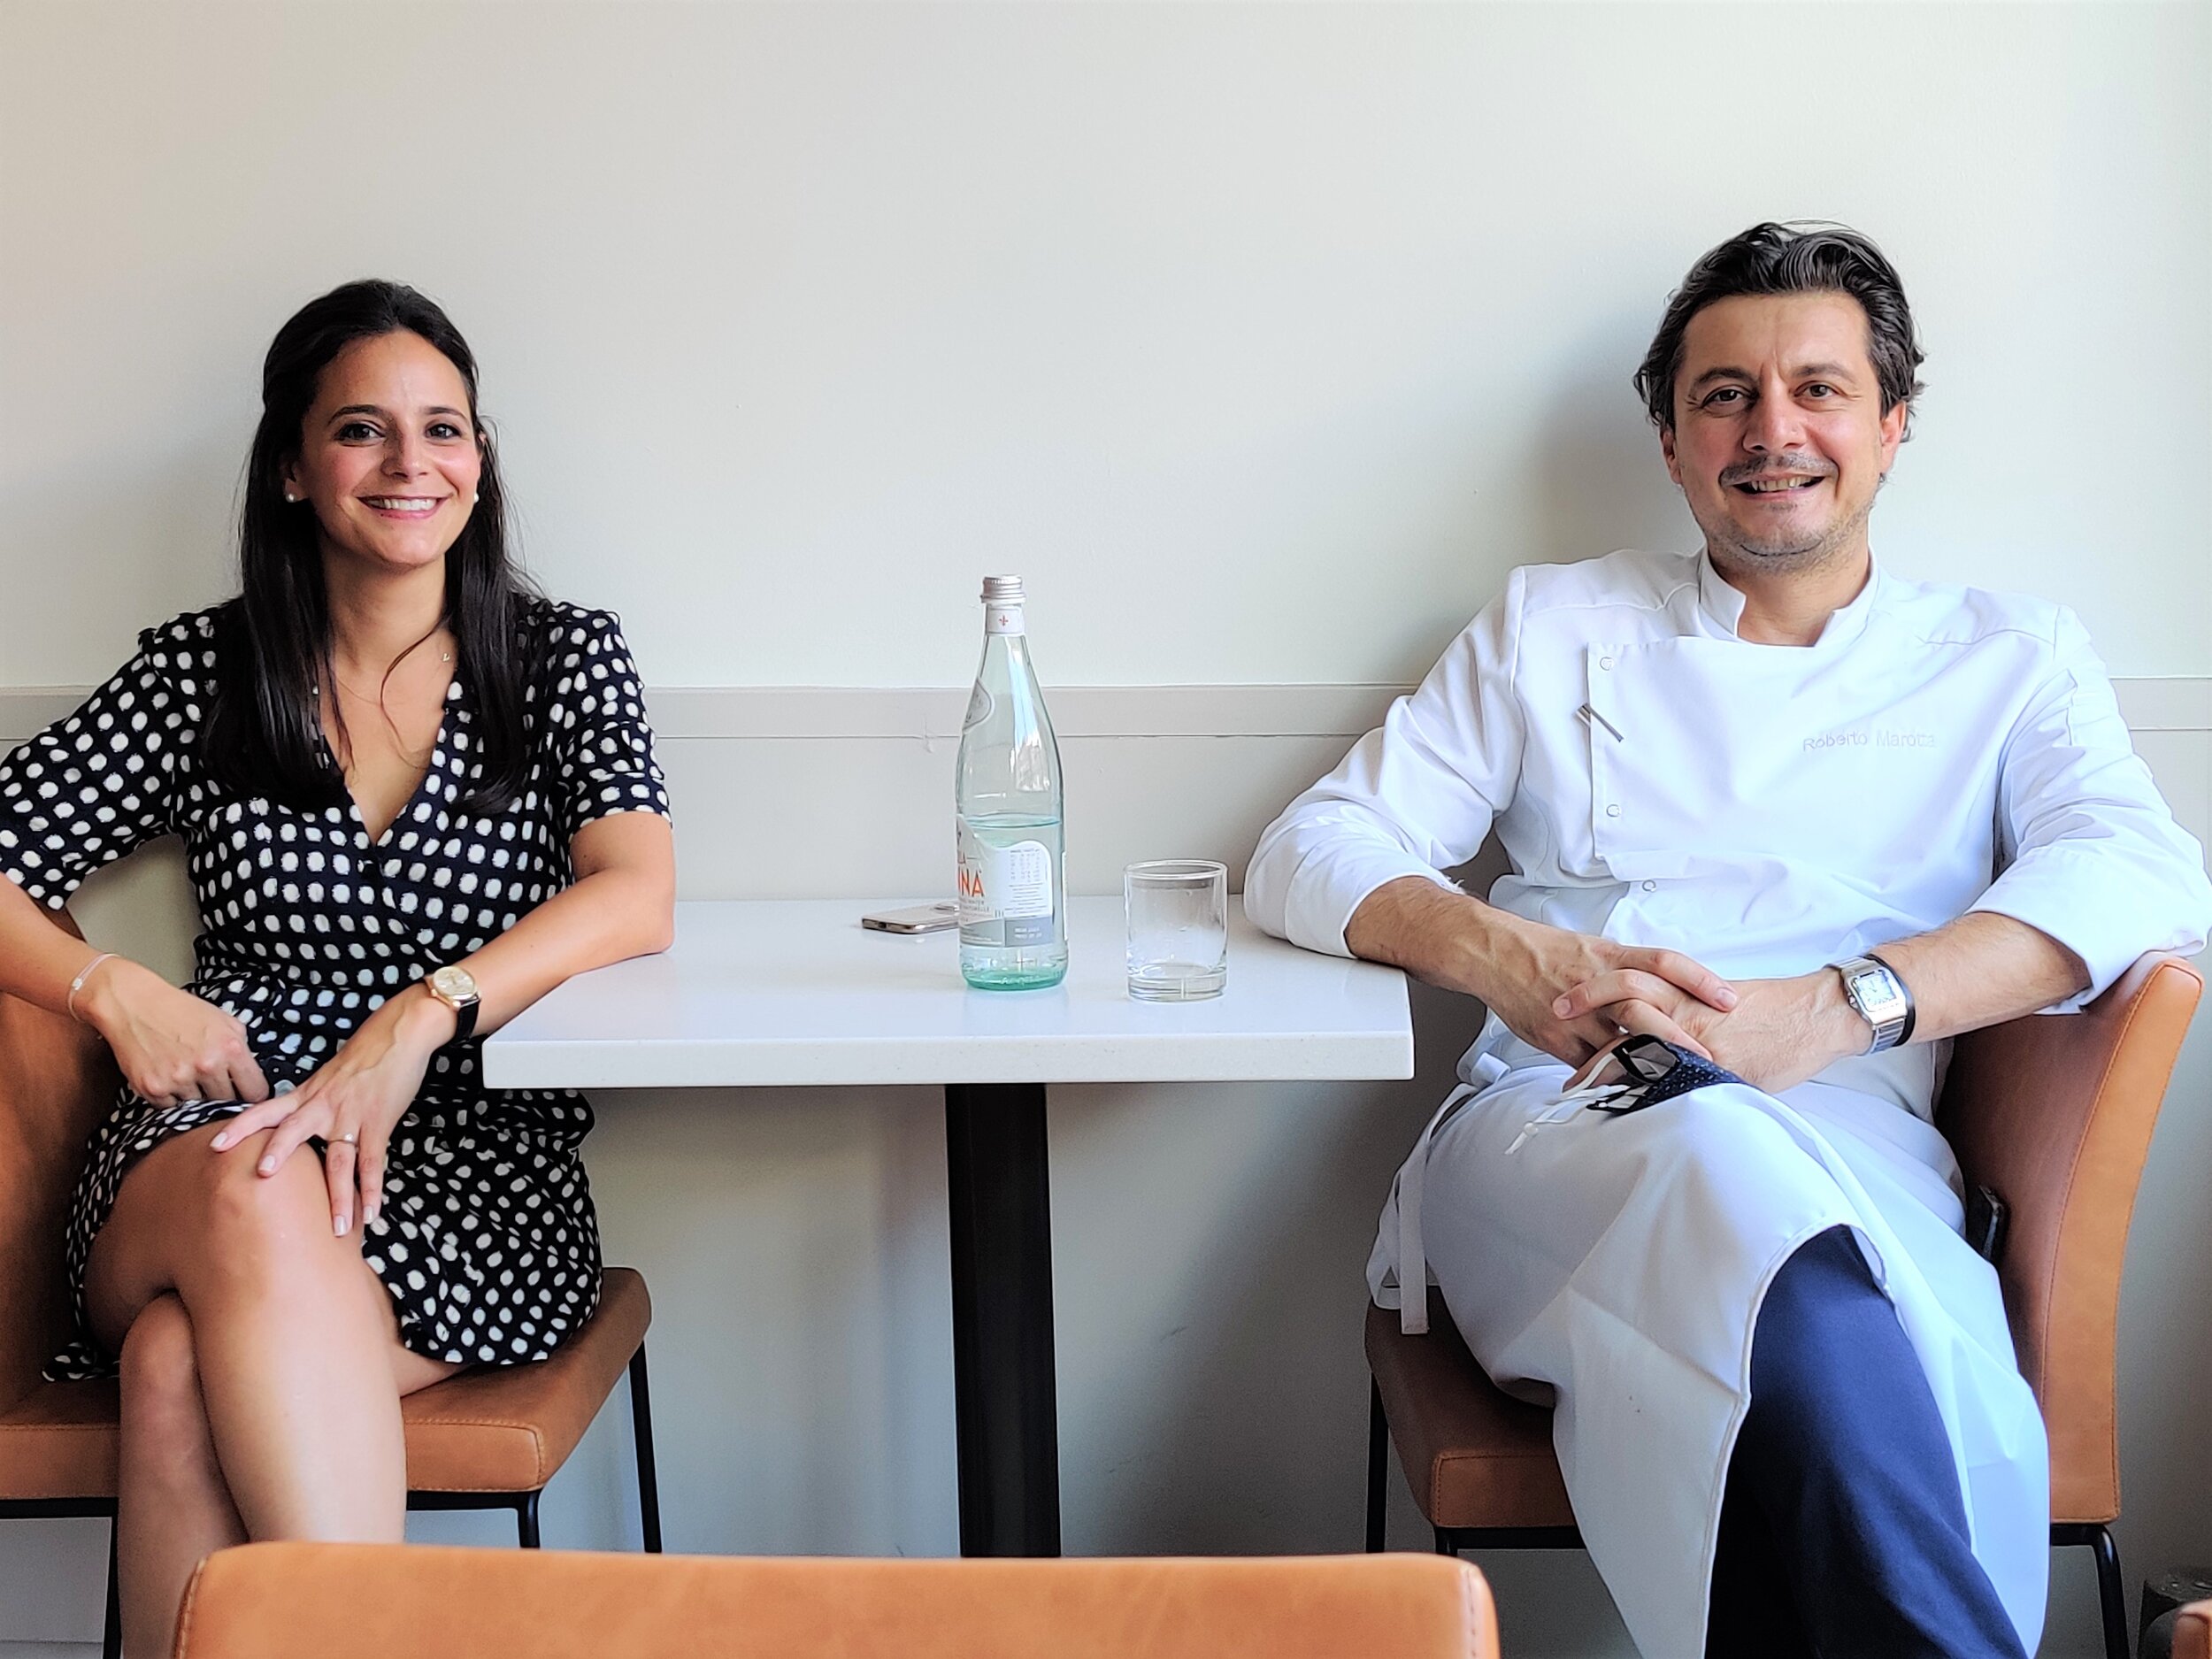 Roberto and Jacqueline sitting side by side at a table, facing the camera, and smiling